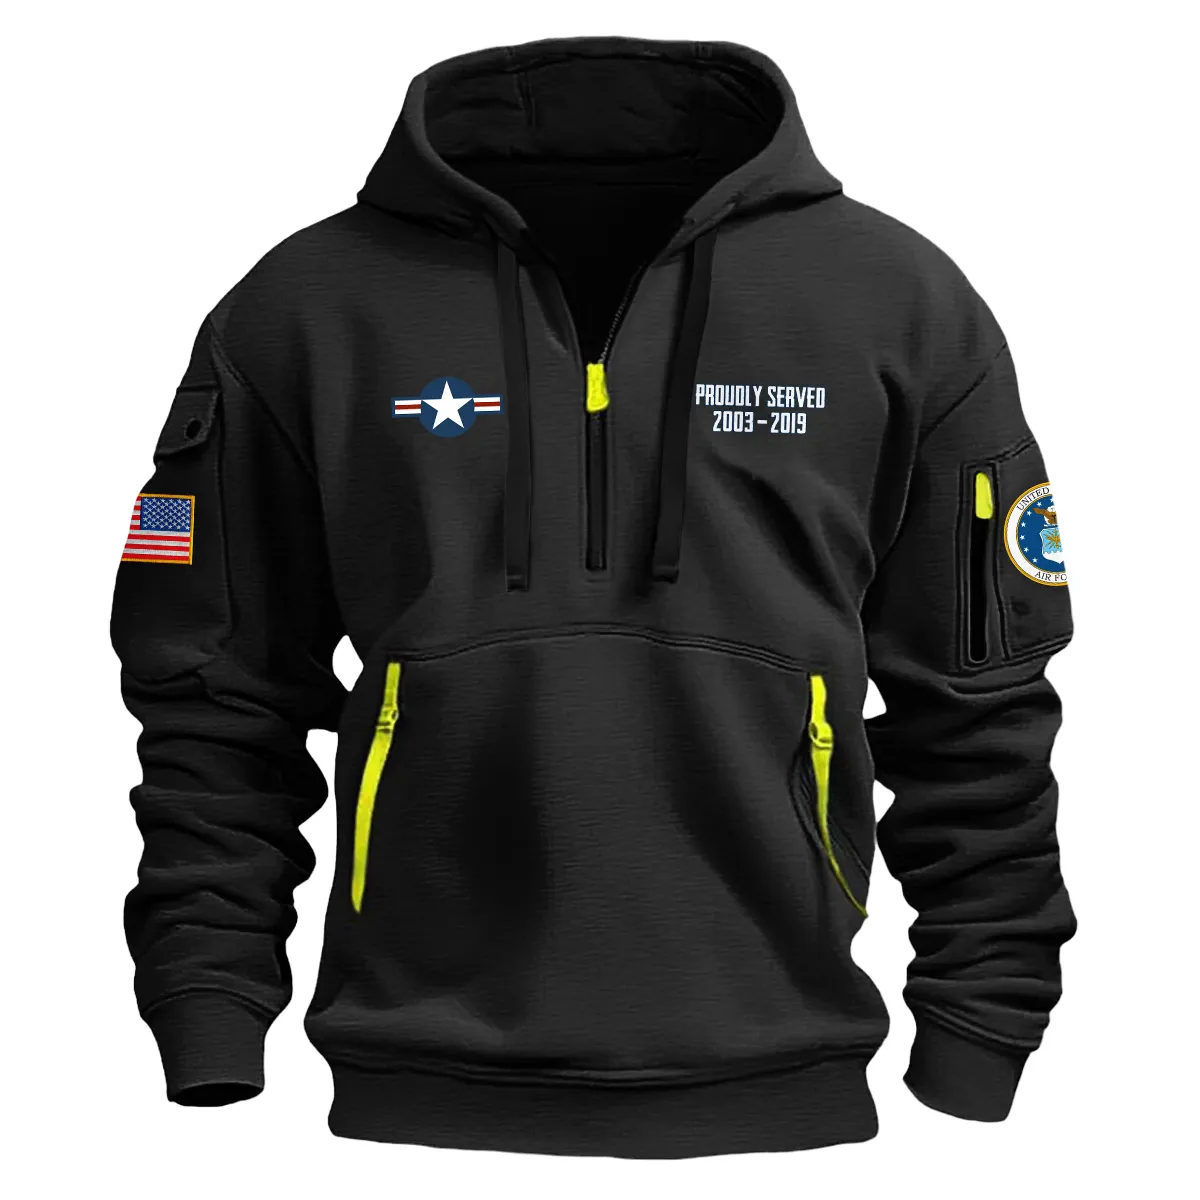 US Military All Branches! Personalized Gift E3-A1C U.S. Air Force Fashion Hoodie Half Zipper